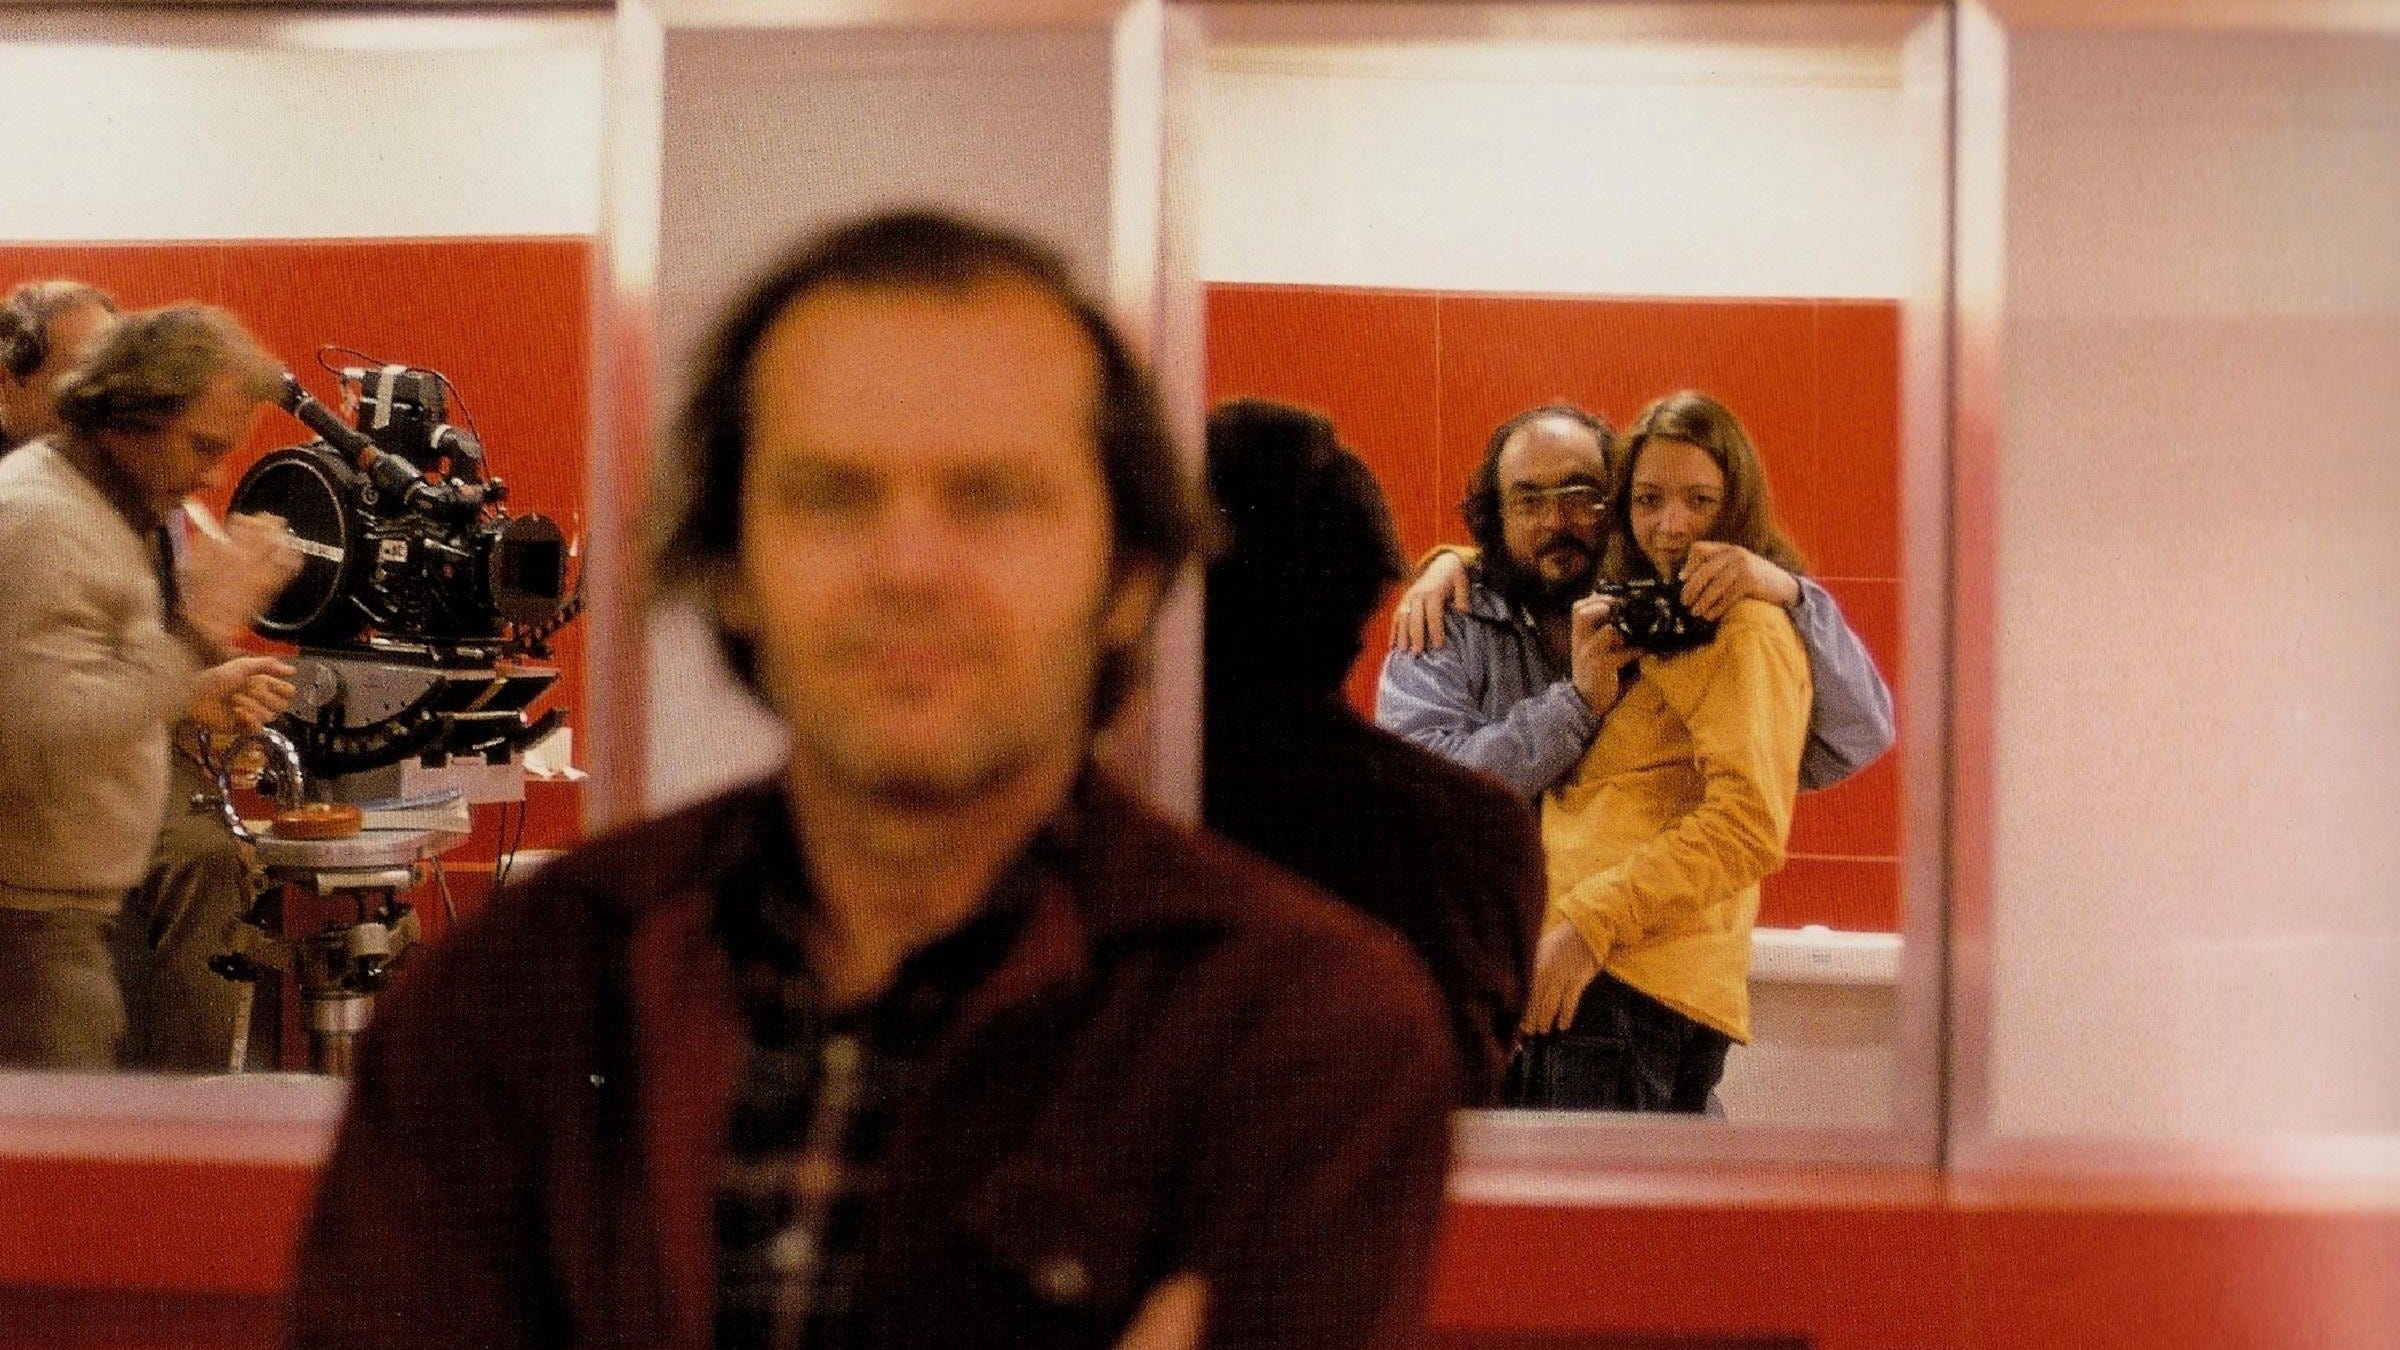 Director Stanley Kubrick takes a self portrait of himeself in a mirror, with Jack Nicholson obscured closer to camera, on the set of "The Shining"